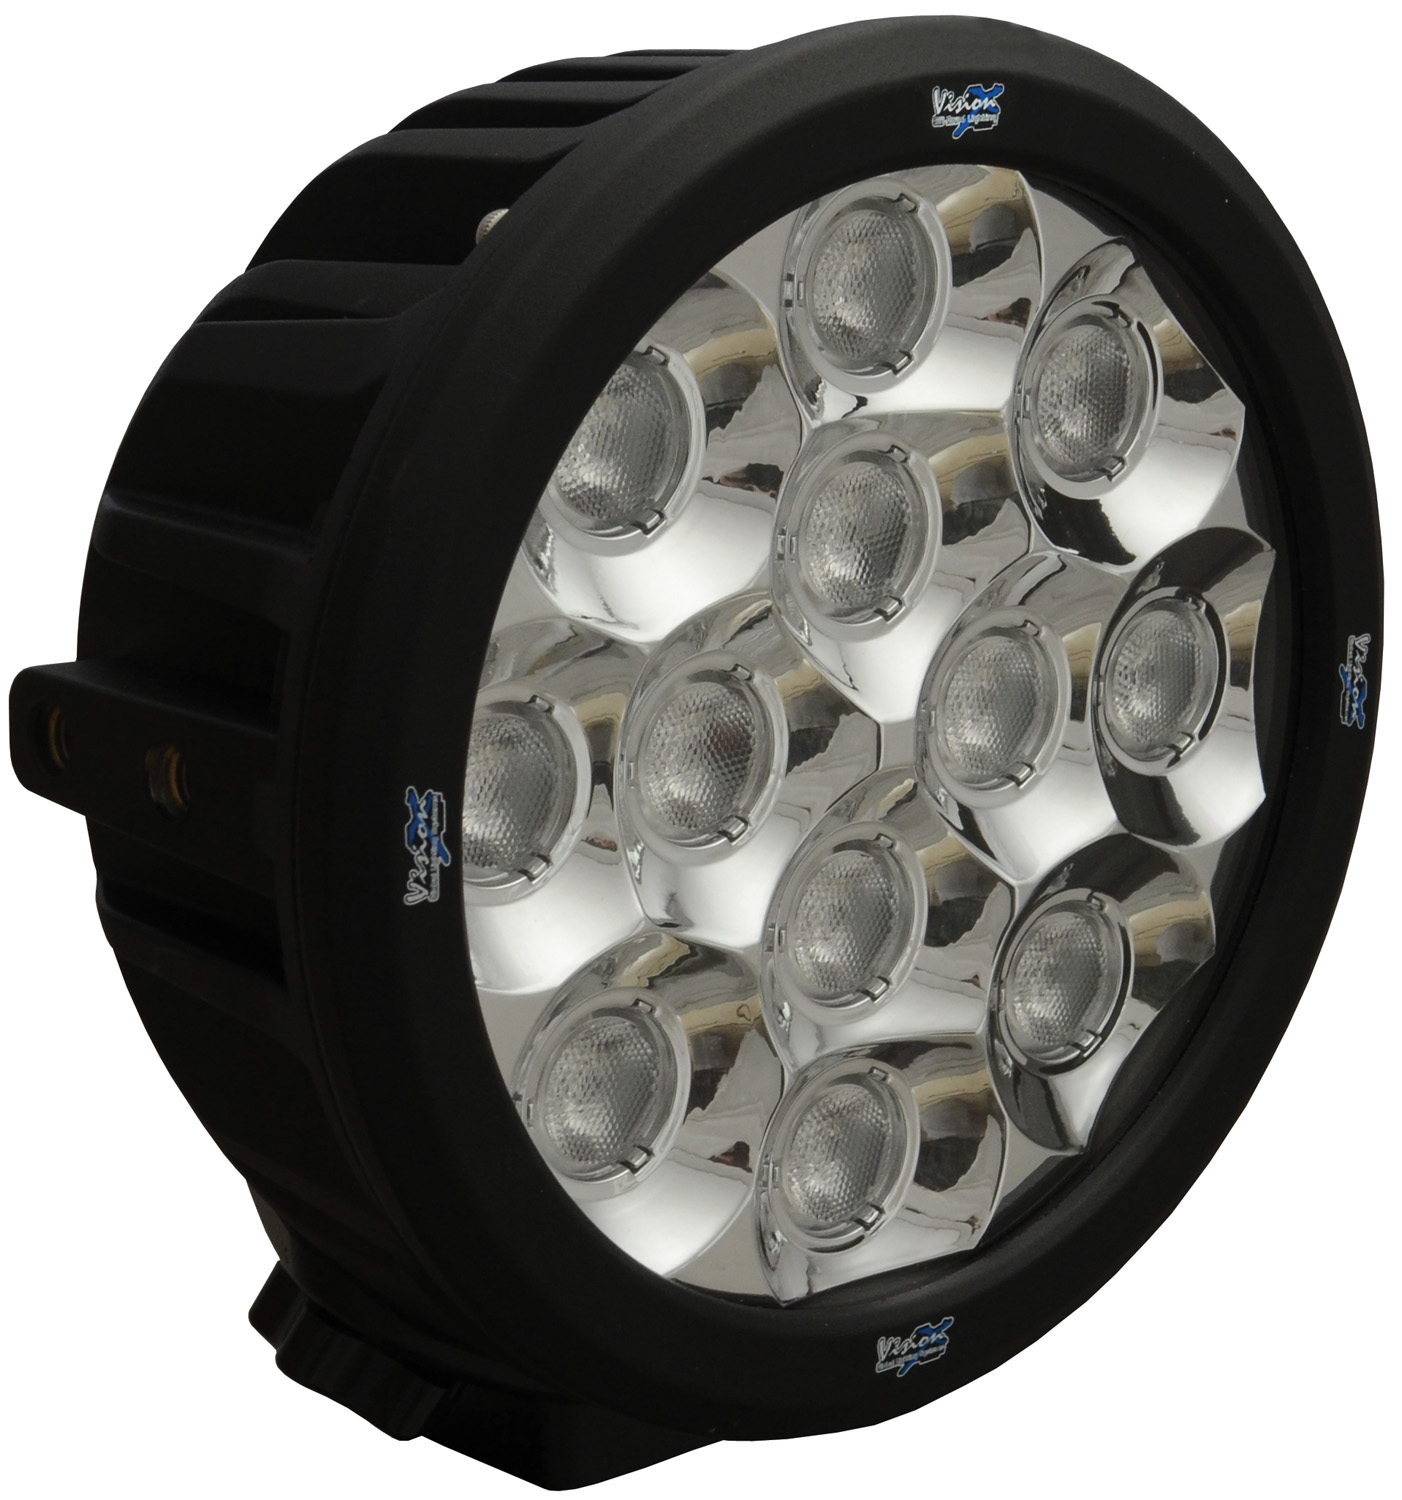 6" TRANSPORTER XTREME 12 5W LED'S 40_ WIDE